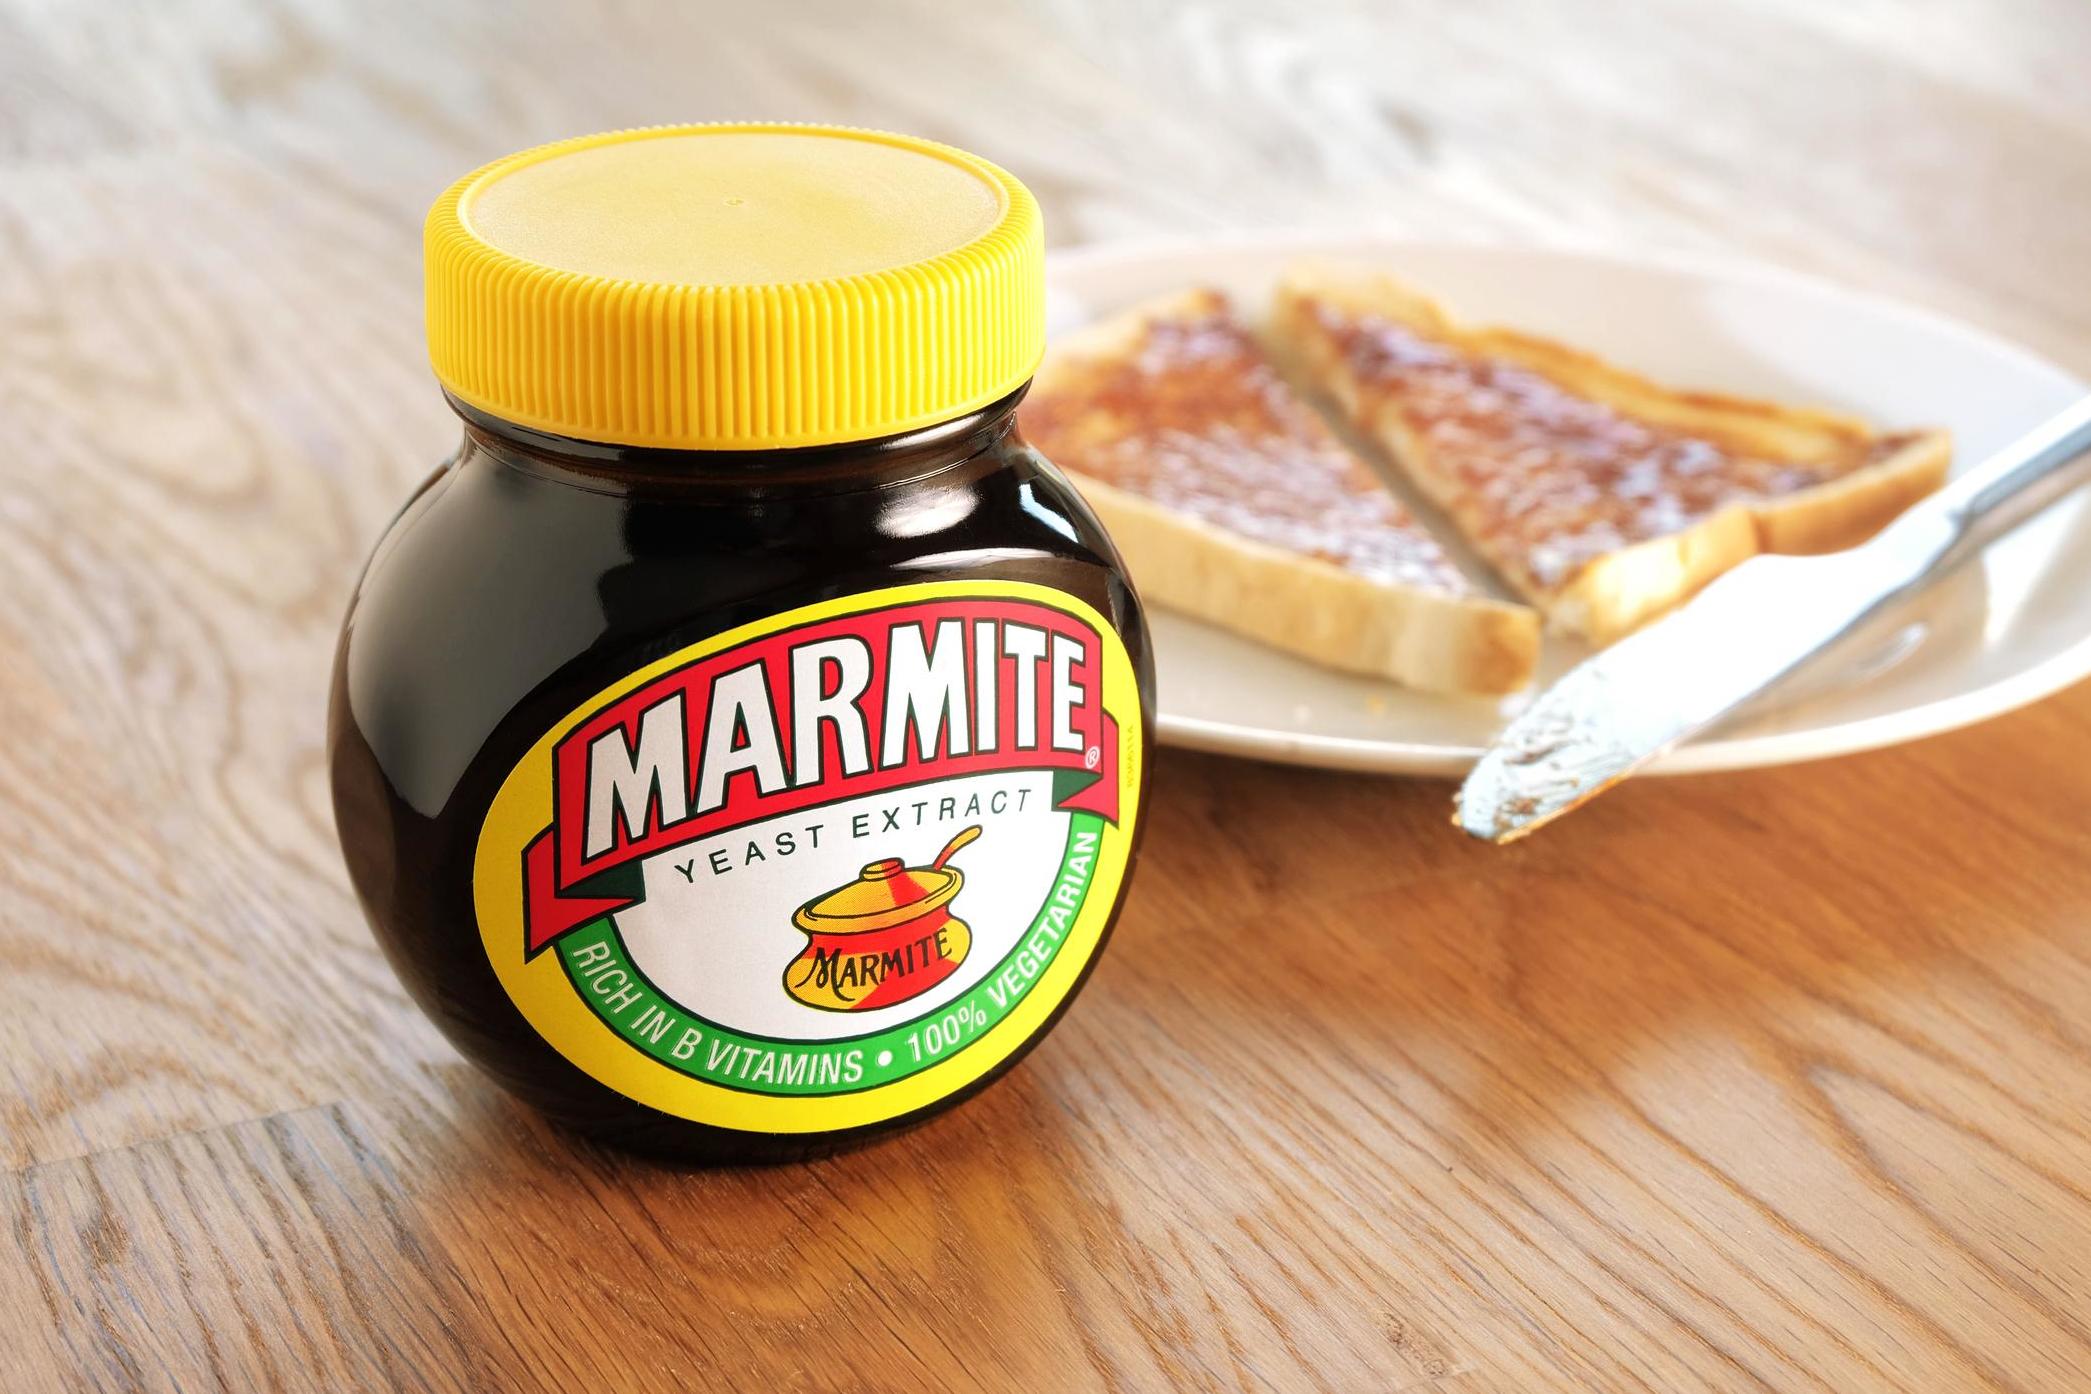 I mar-might give it a try: this is your cue, lovers of yeast extract, the time has come to experiment